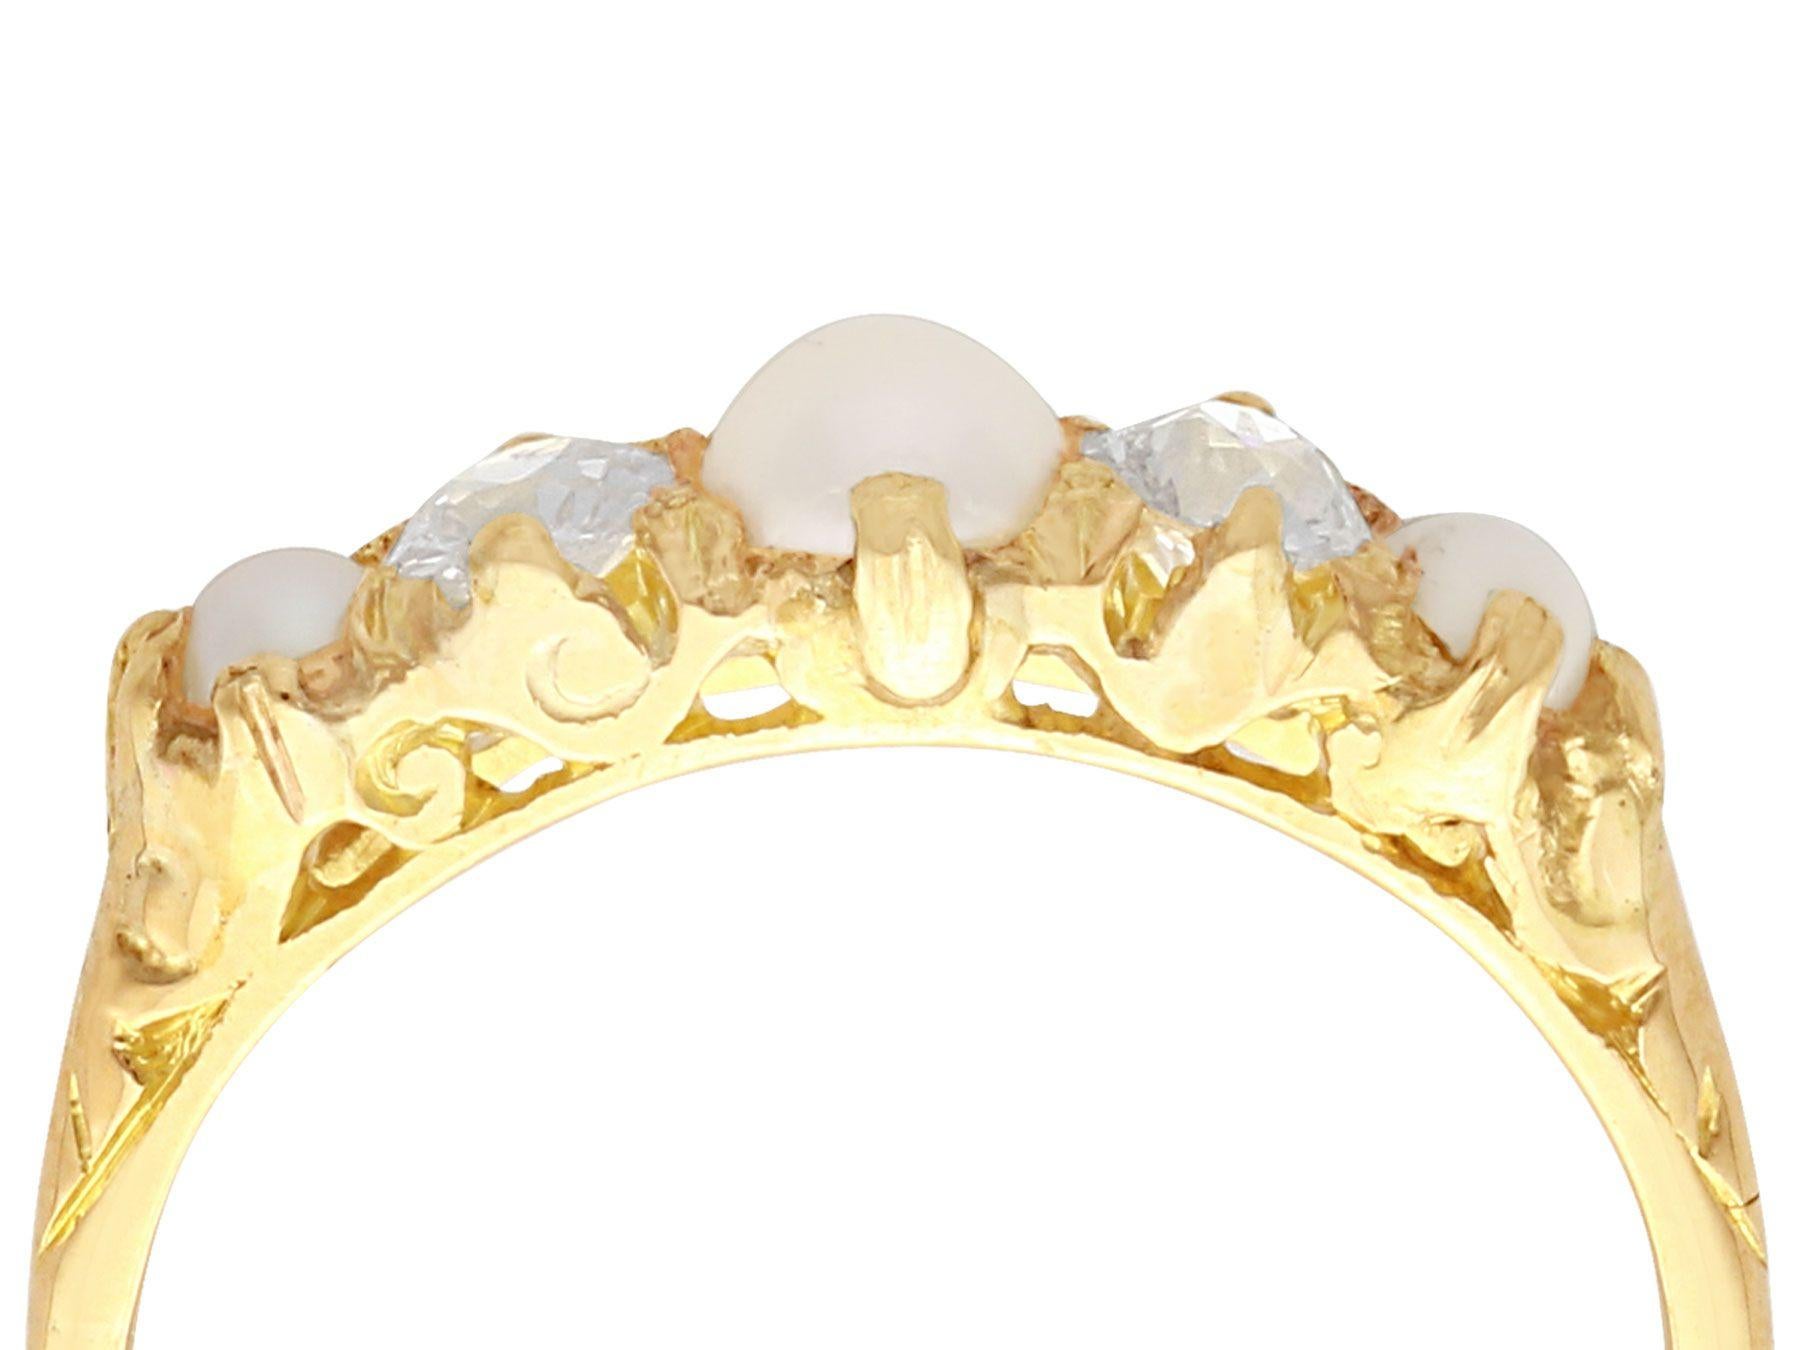 A fine and impressive 0.33 carat diamond and pearl, 18 karat yellow gold dress ring; part of our antique jewelry and estate jewelry collections.

This fine and impressive pearl dress ring has been crafted in 18k yellow gold.

The three graduating